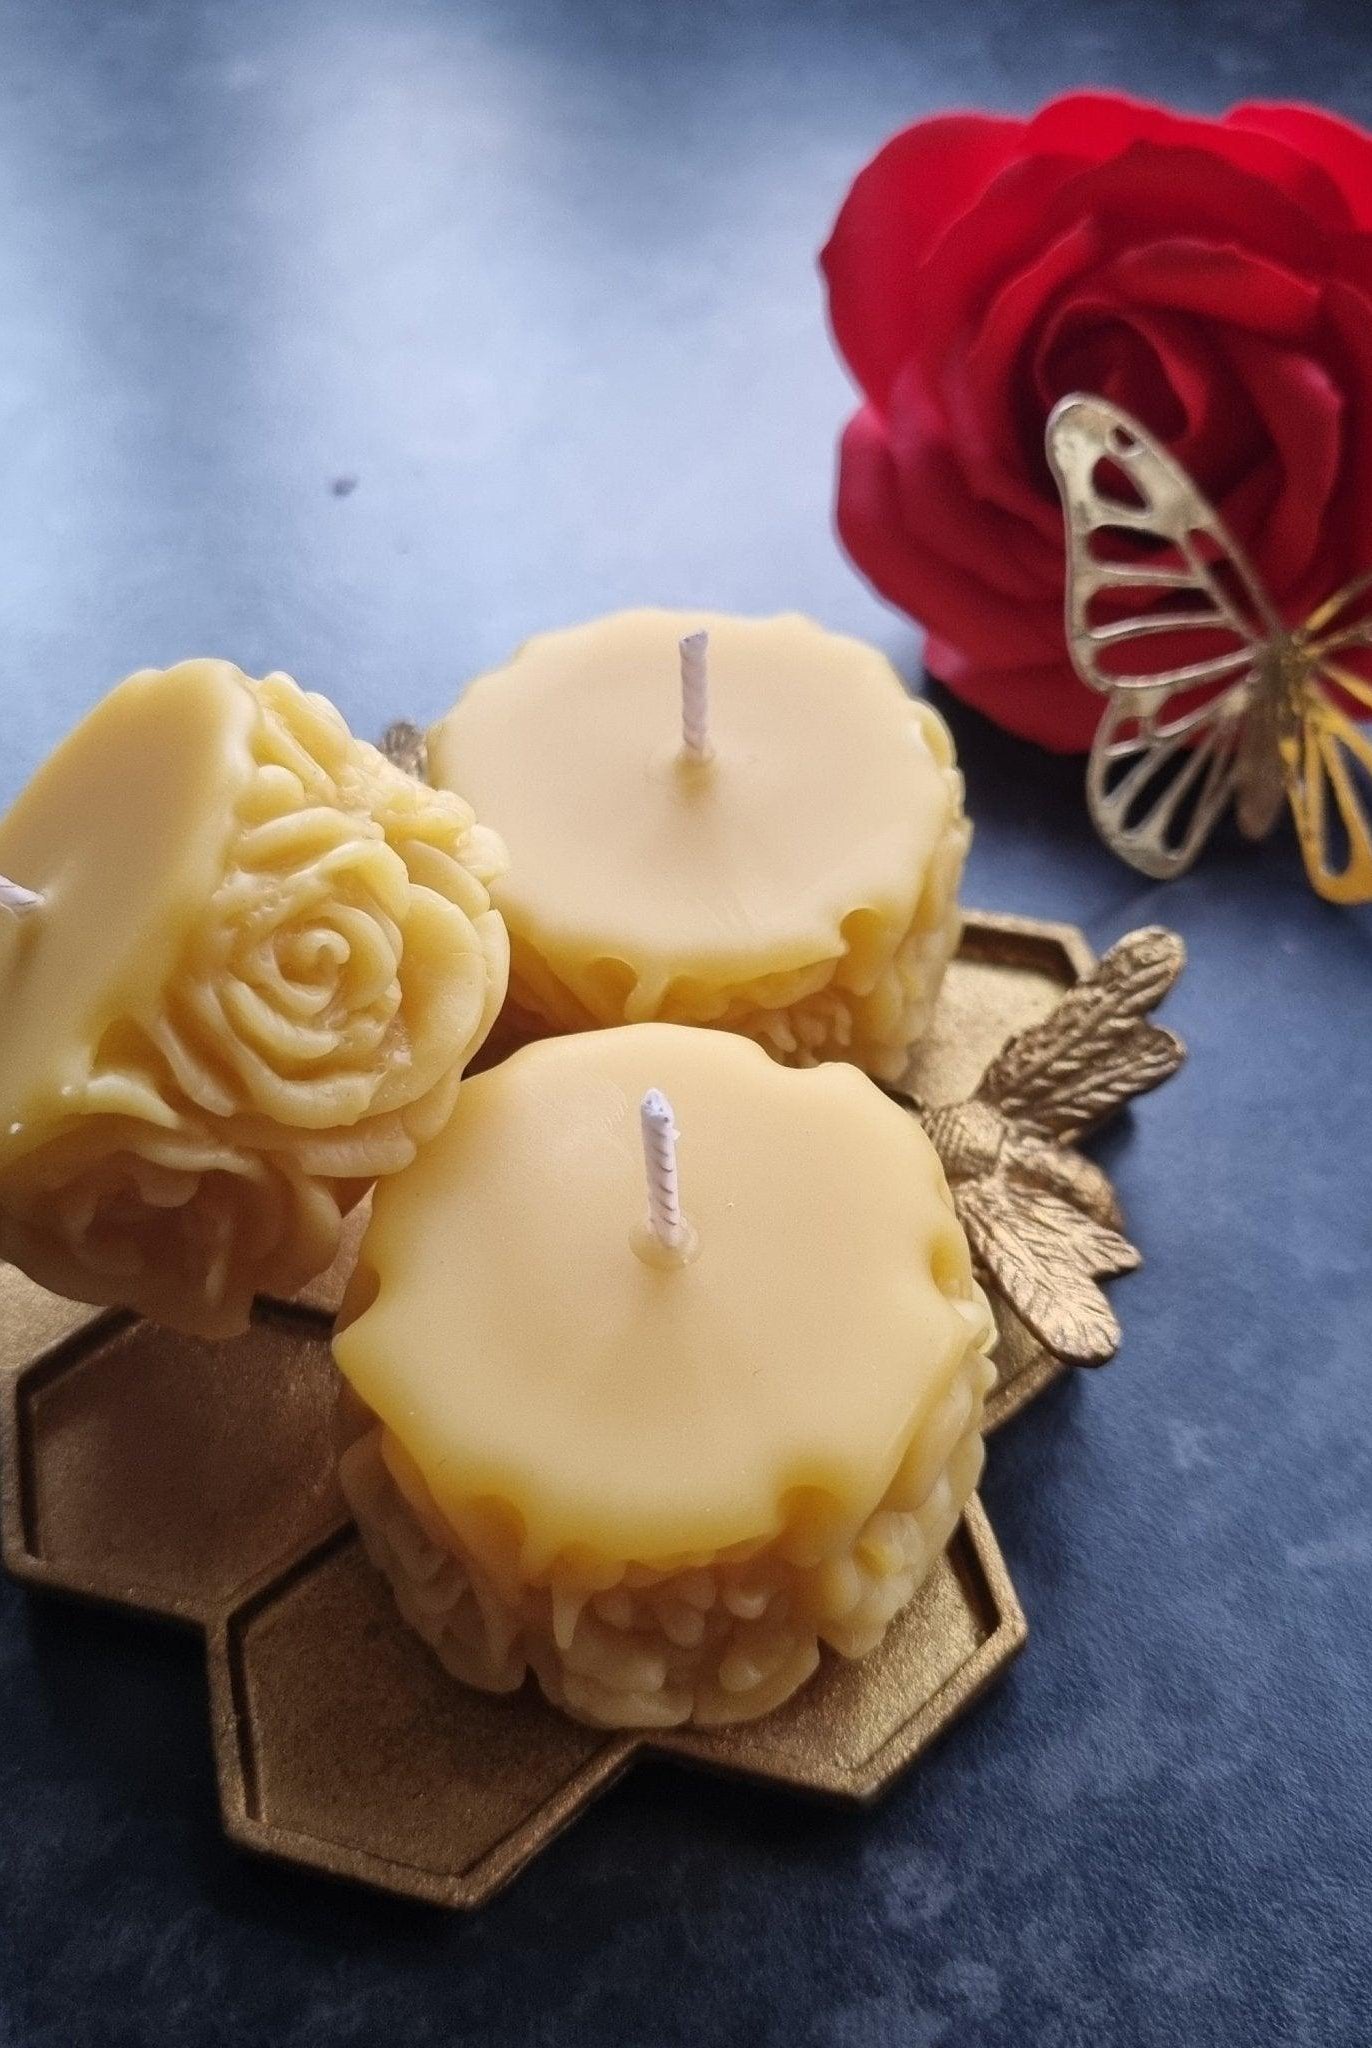 Set of 3 Pure Beeswax Votive Candles with Elegant Rose Design | 1.6oz - Soulshinecreators - aesthetic candle